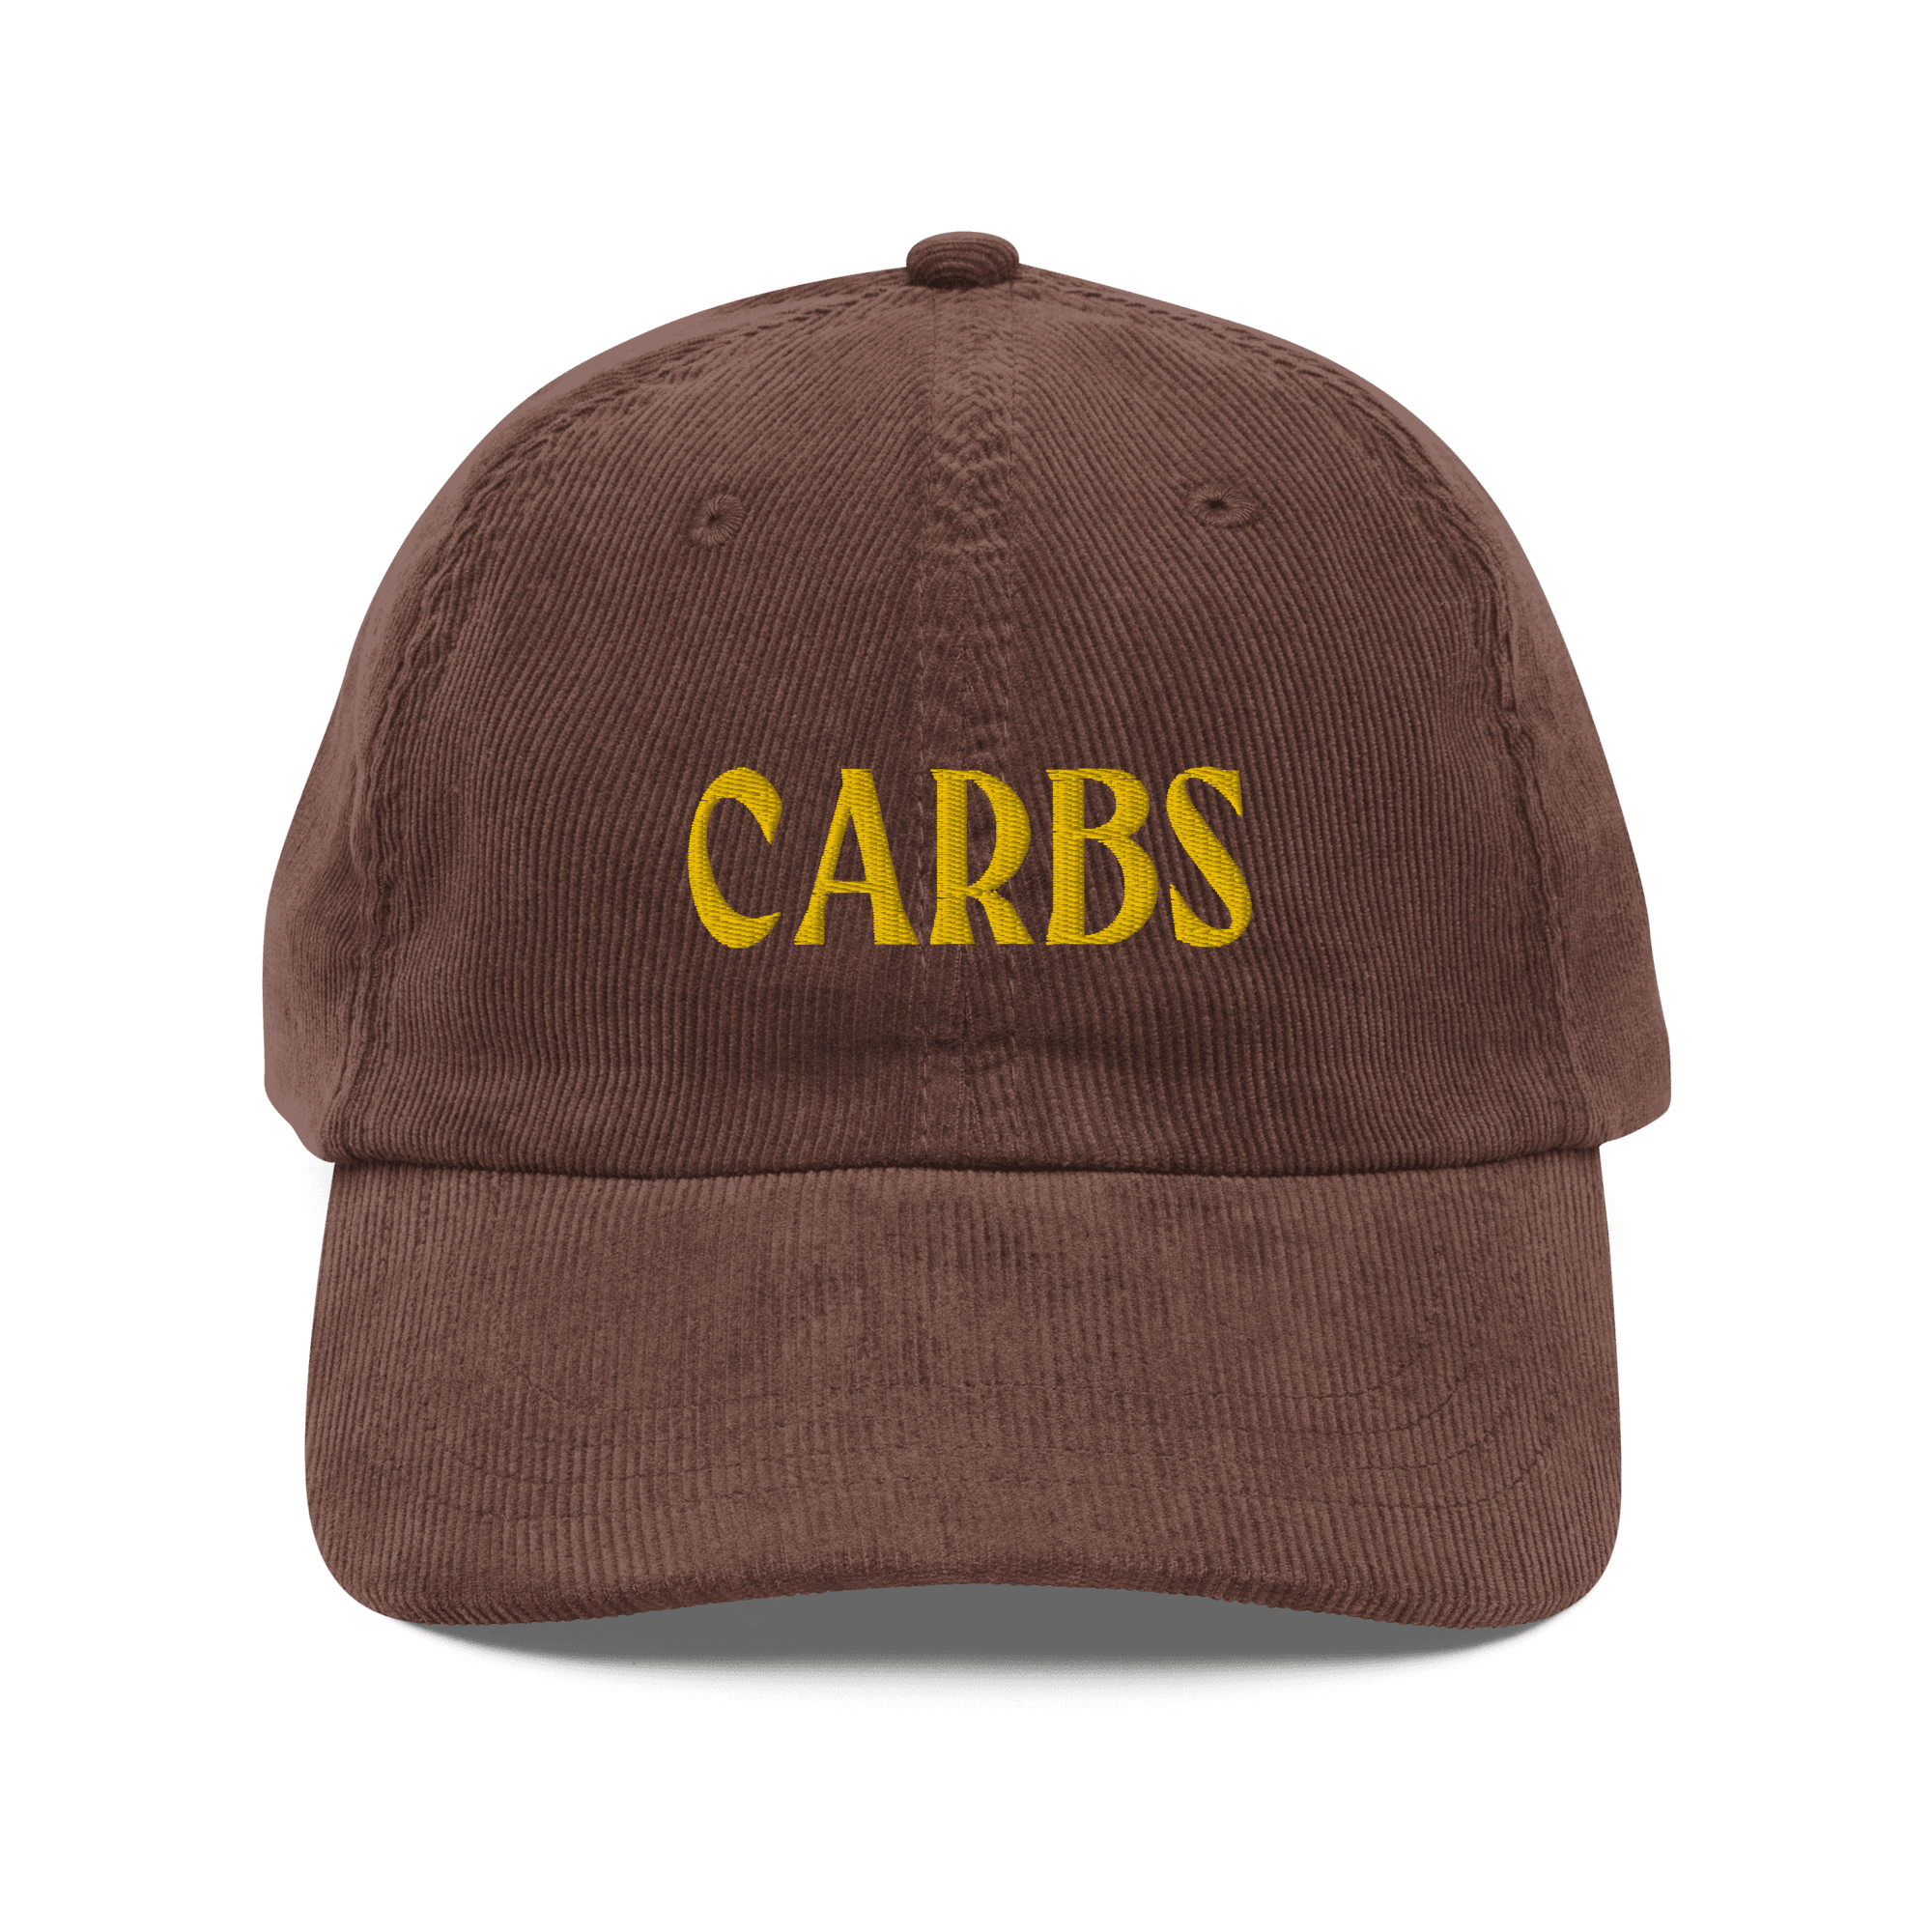 CARBS Embroidered Corduroy Hat - Polychrome Goods 🍊